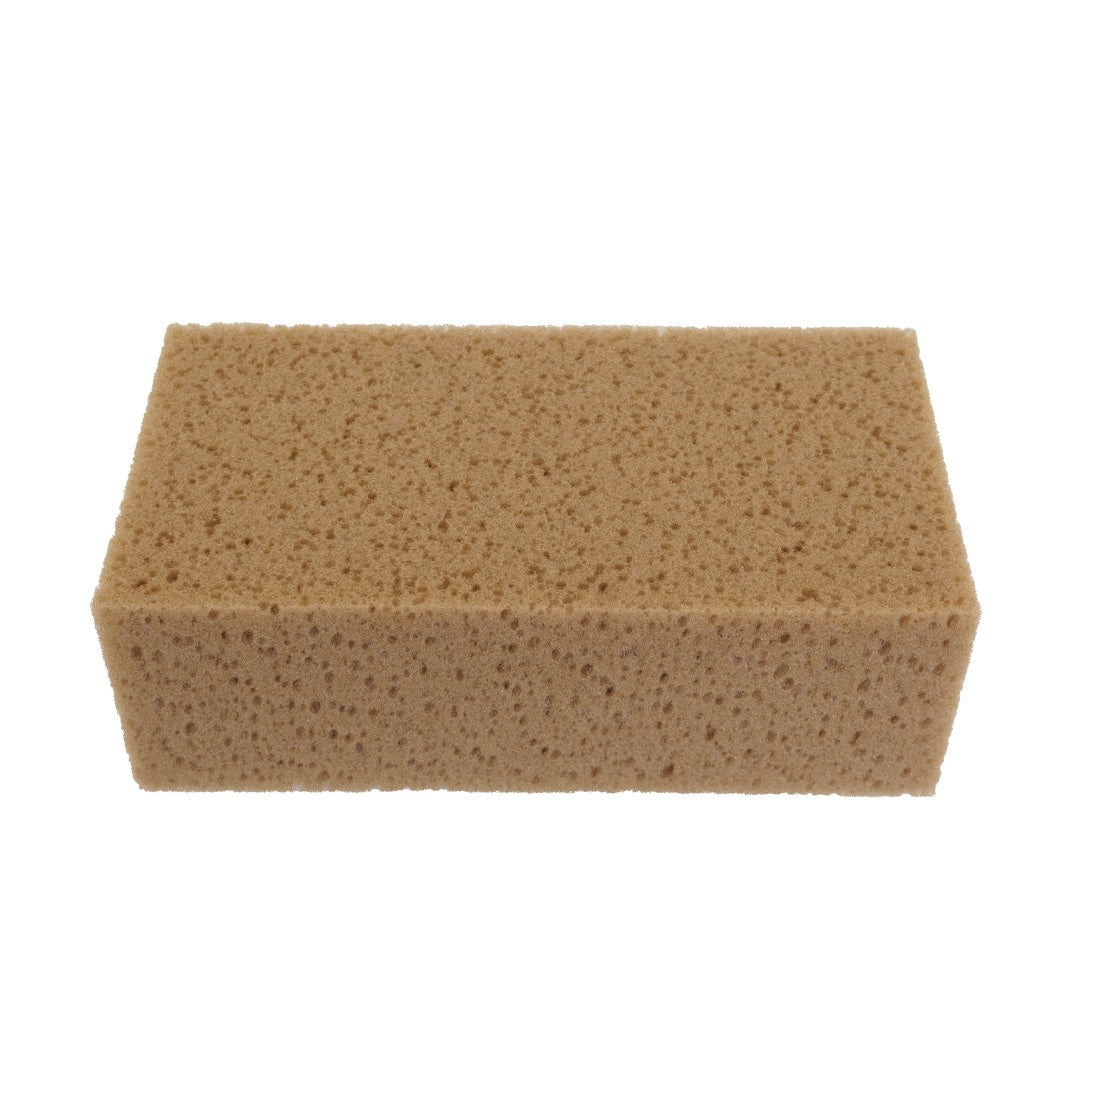 Pulex Sponge for Clamp Top Angle View